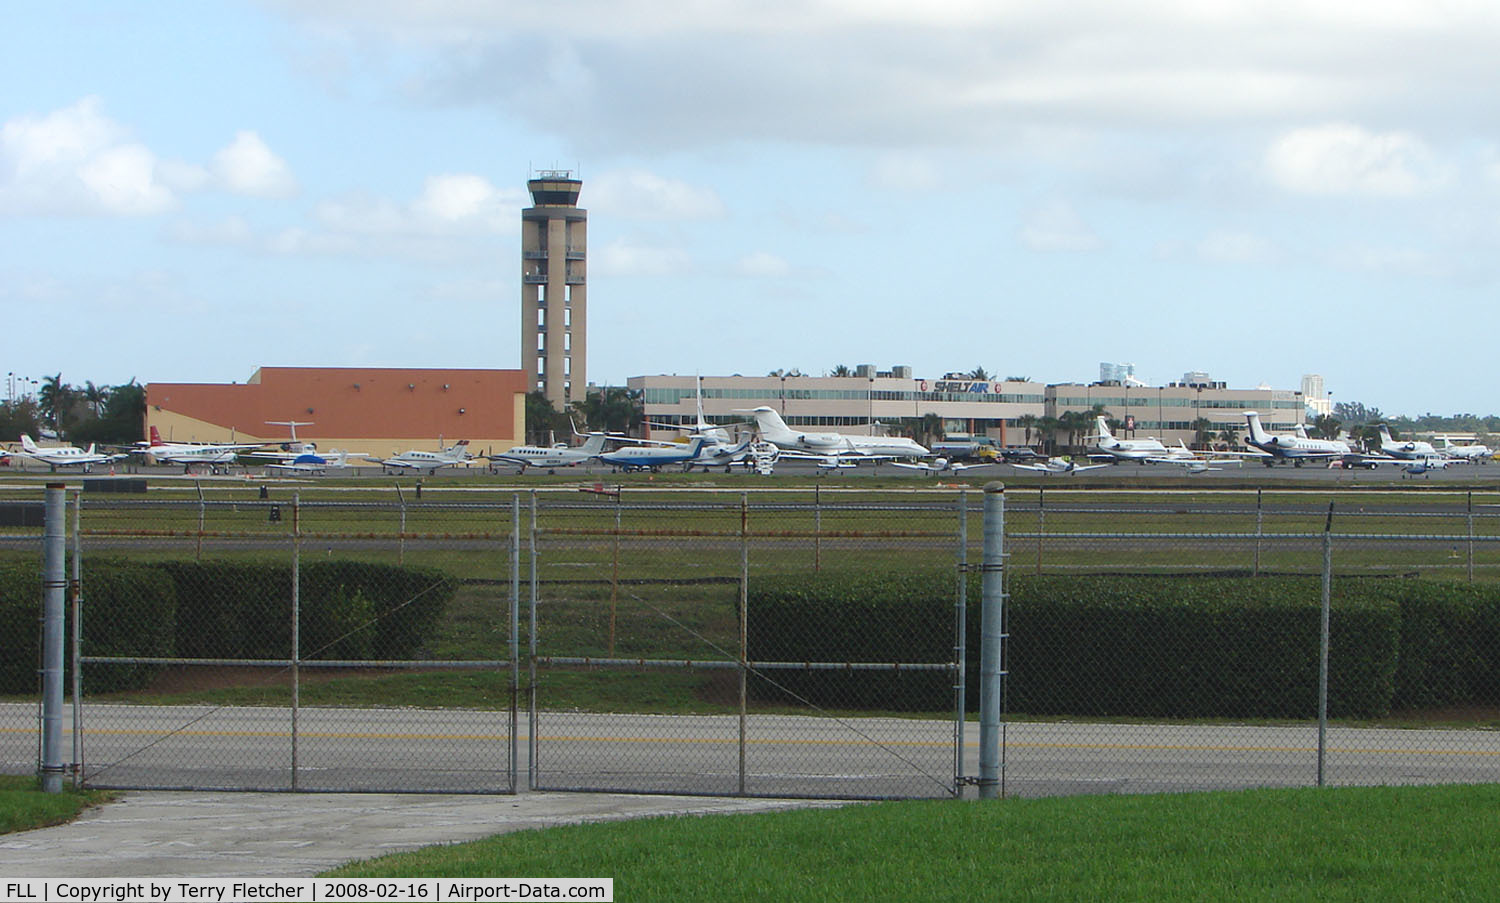 Fort Lauderdale/hollywood International Airport (FLL) - One of the FLL executive ramps during Miami Boat Show weekend